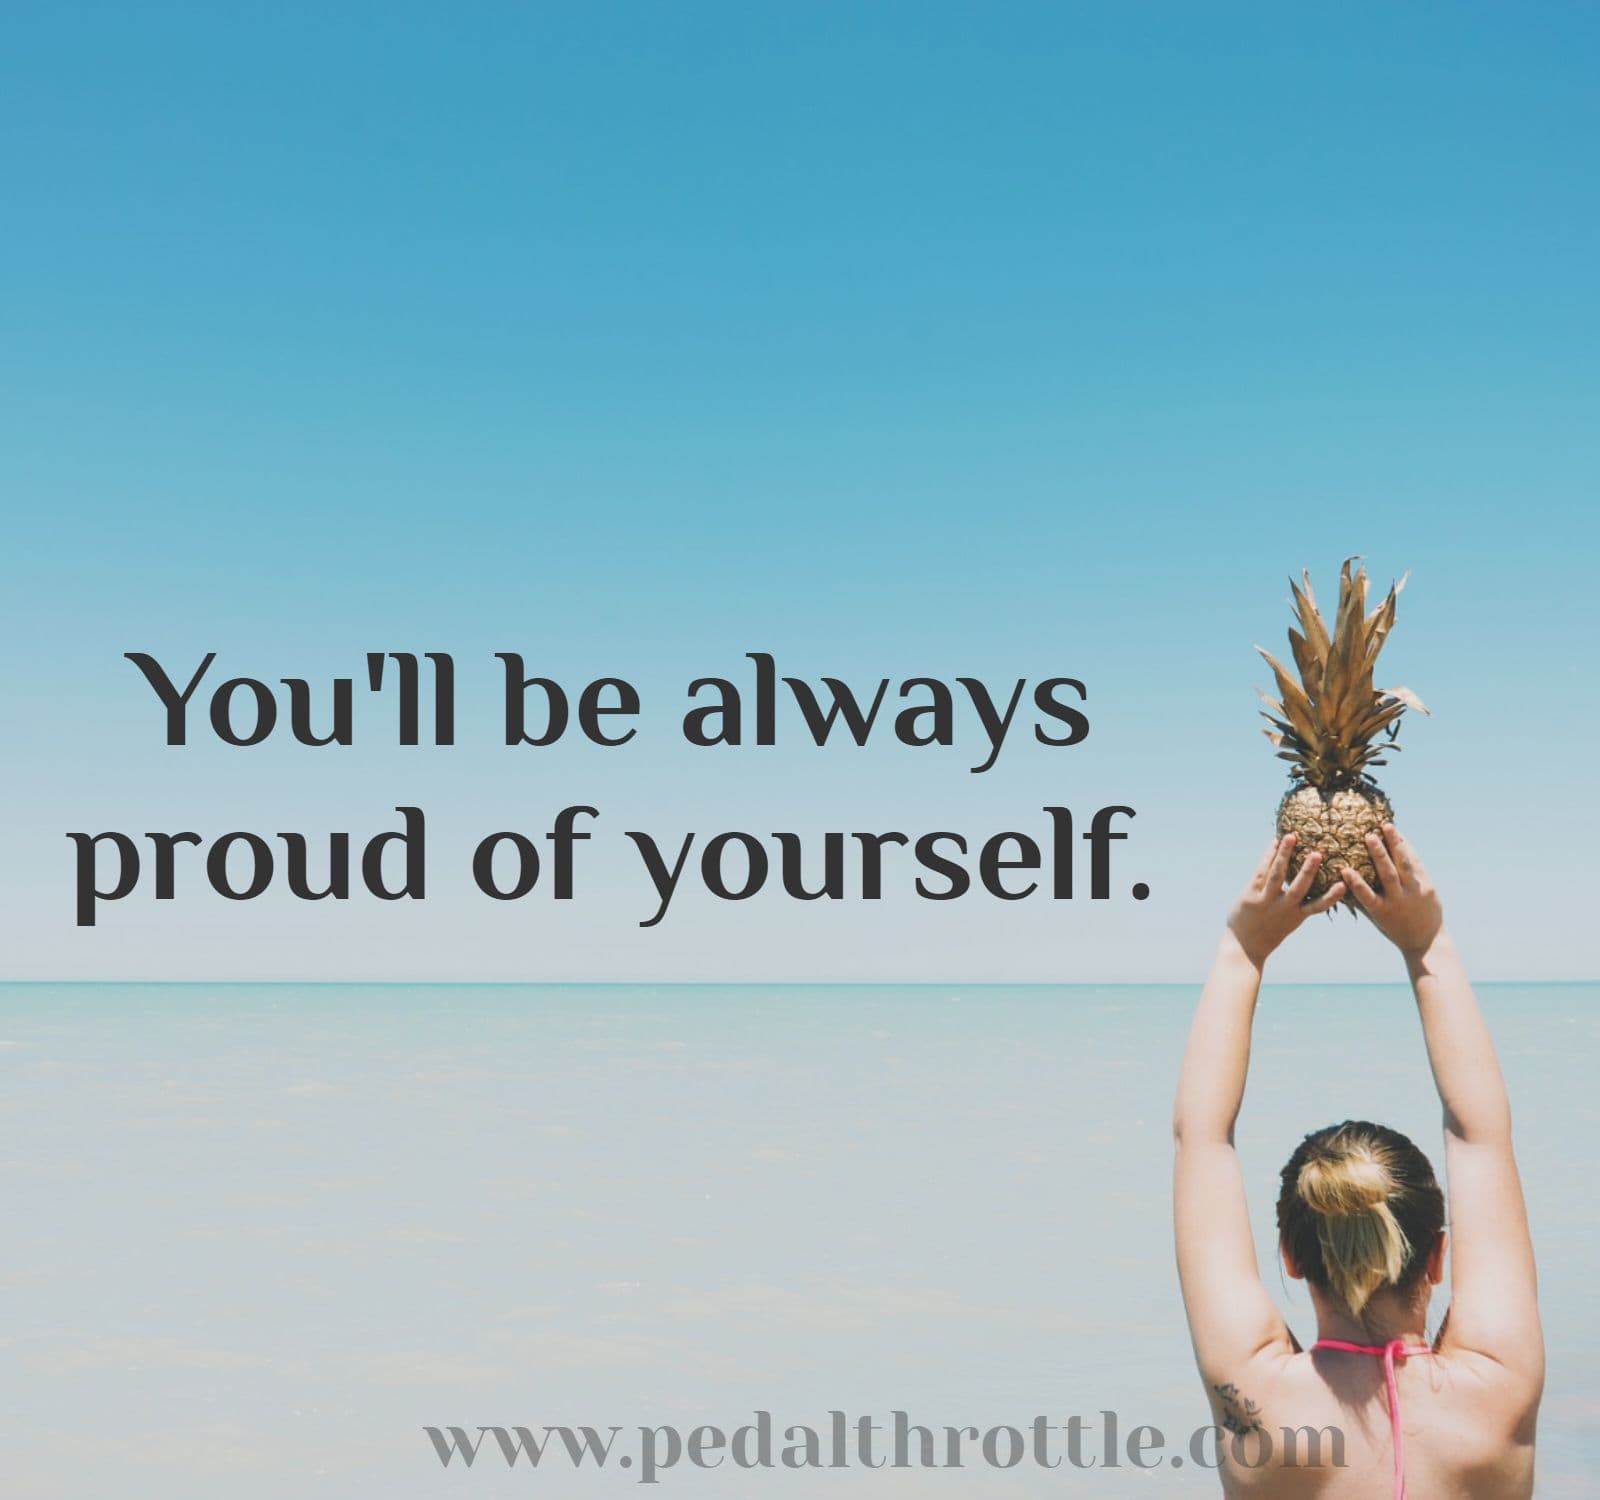 You'll be proud of yourself img_benefits of solo traveling